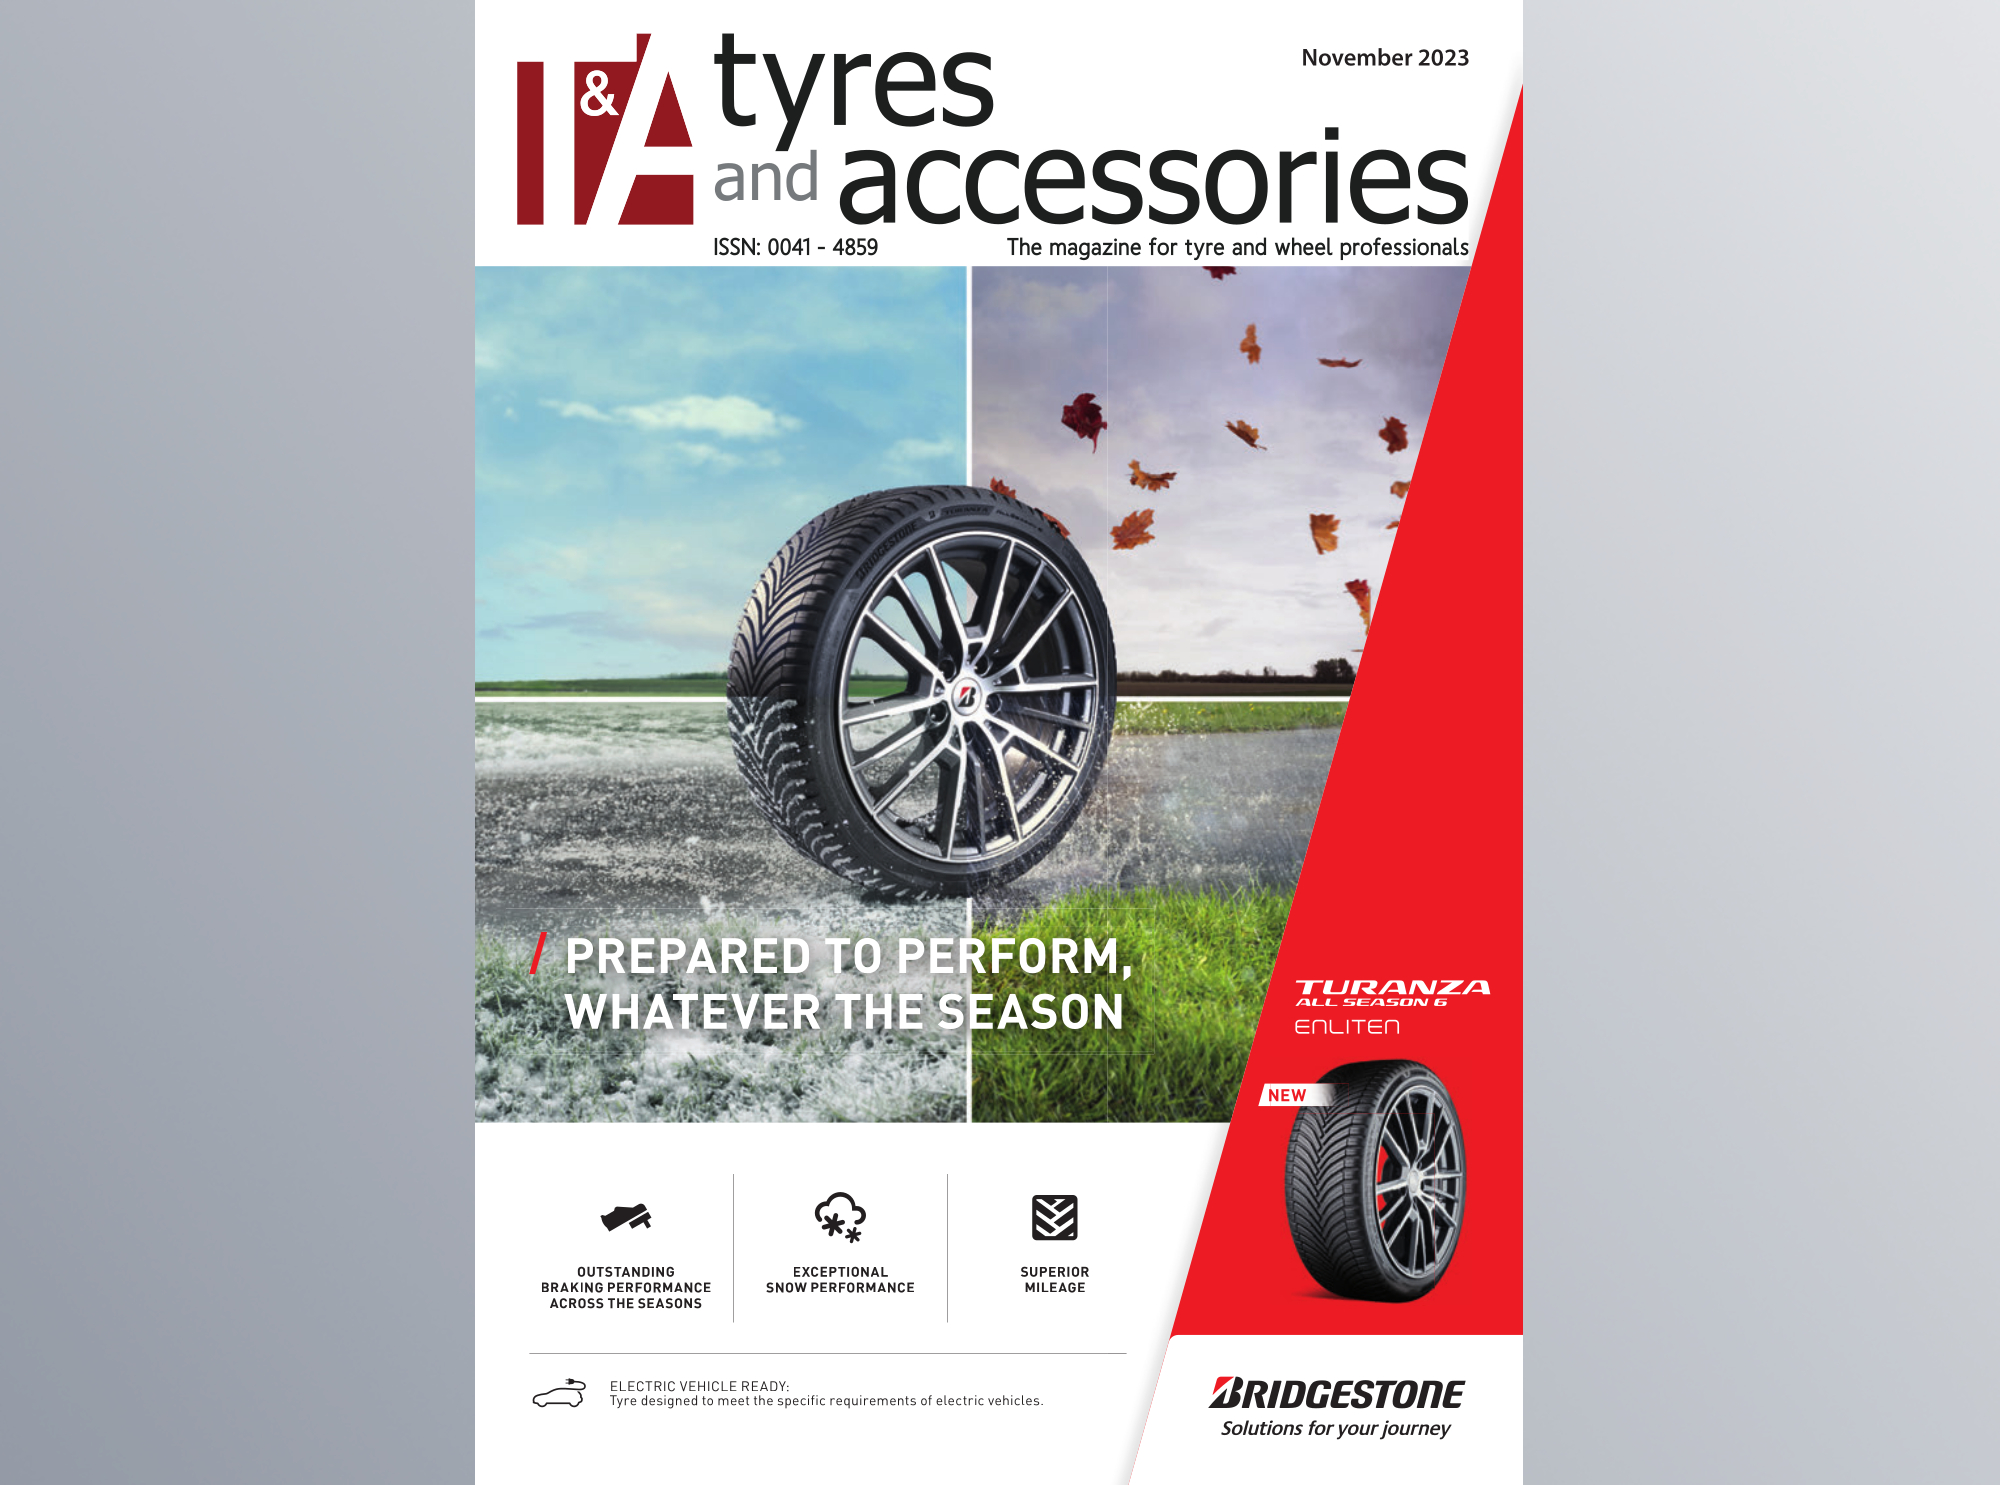 Tyres & Accessories November 2023 issue available to read online